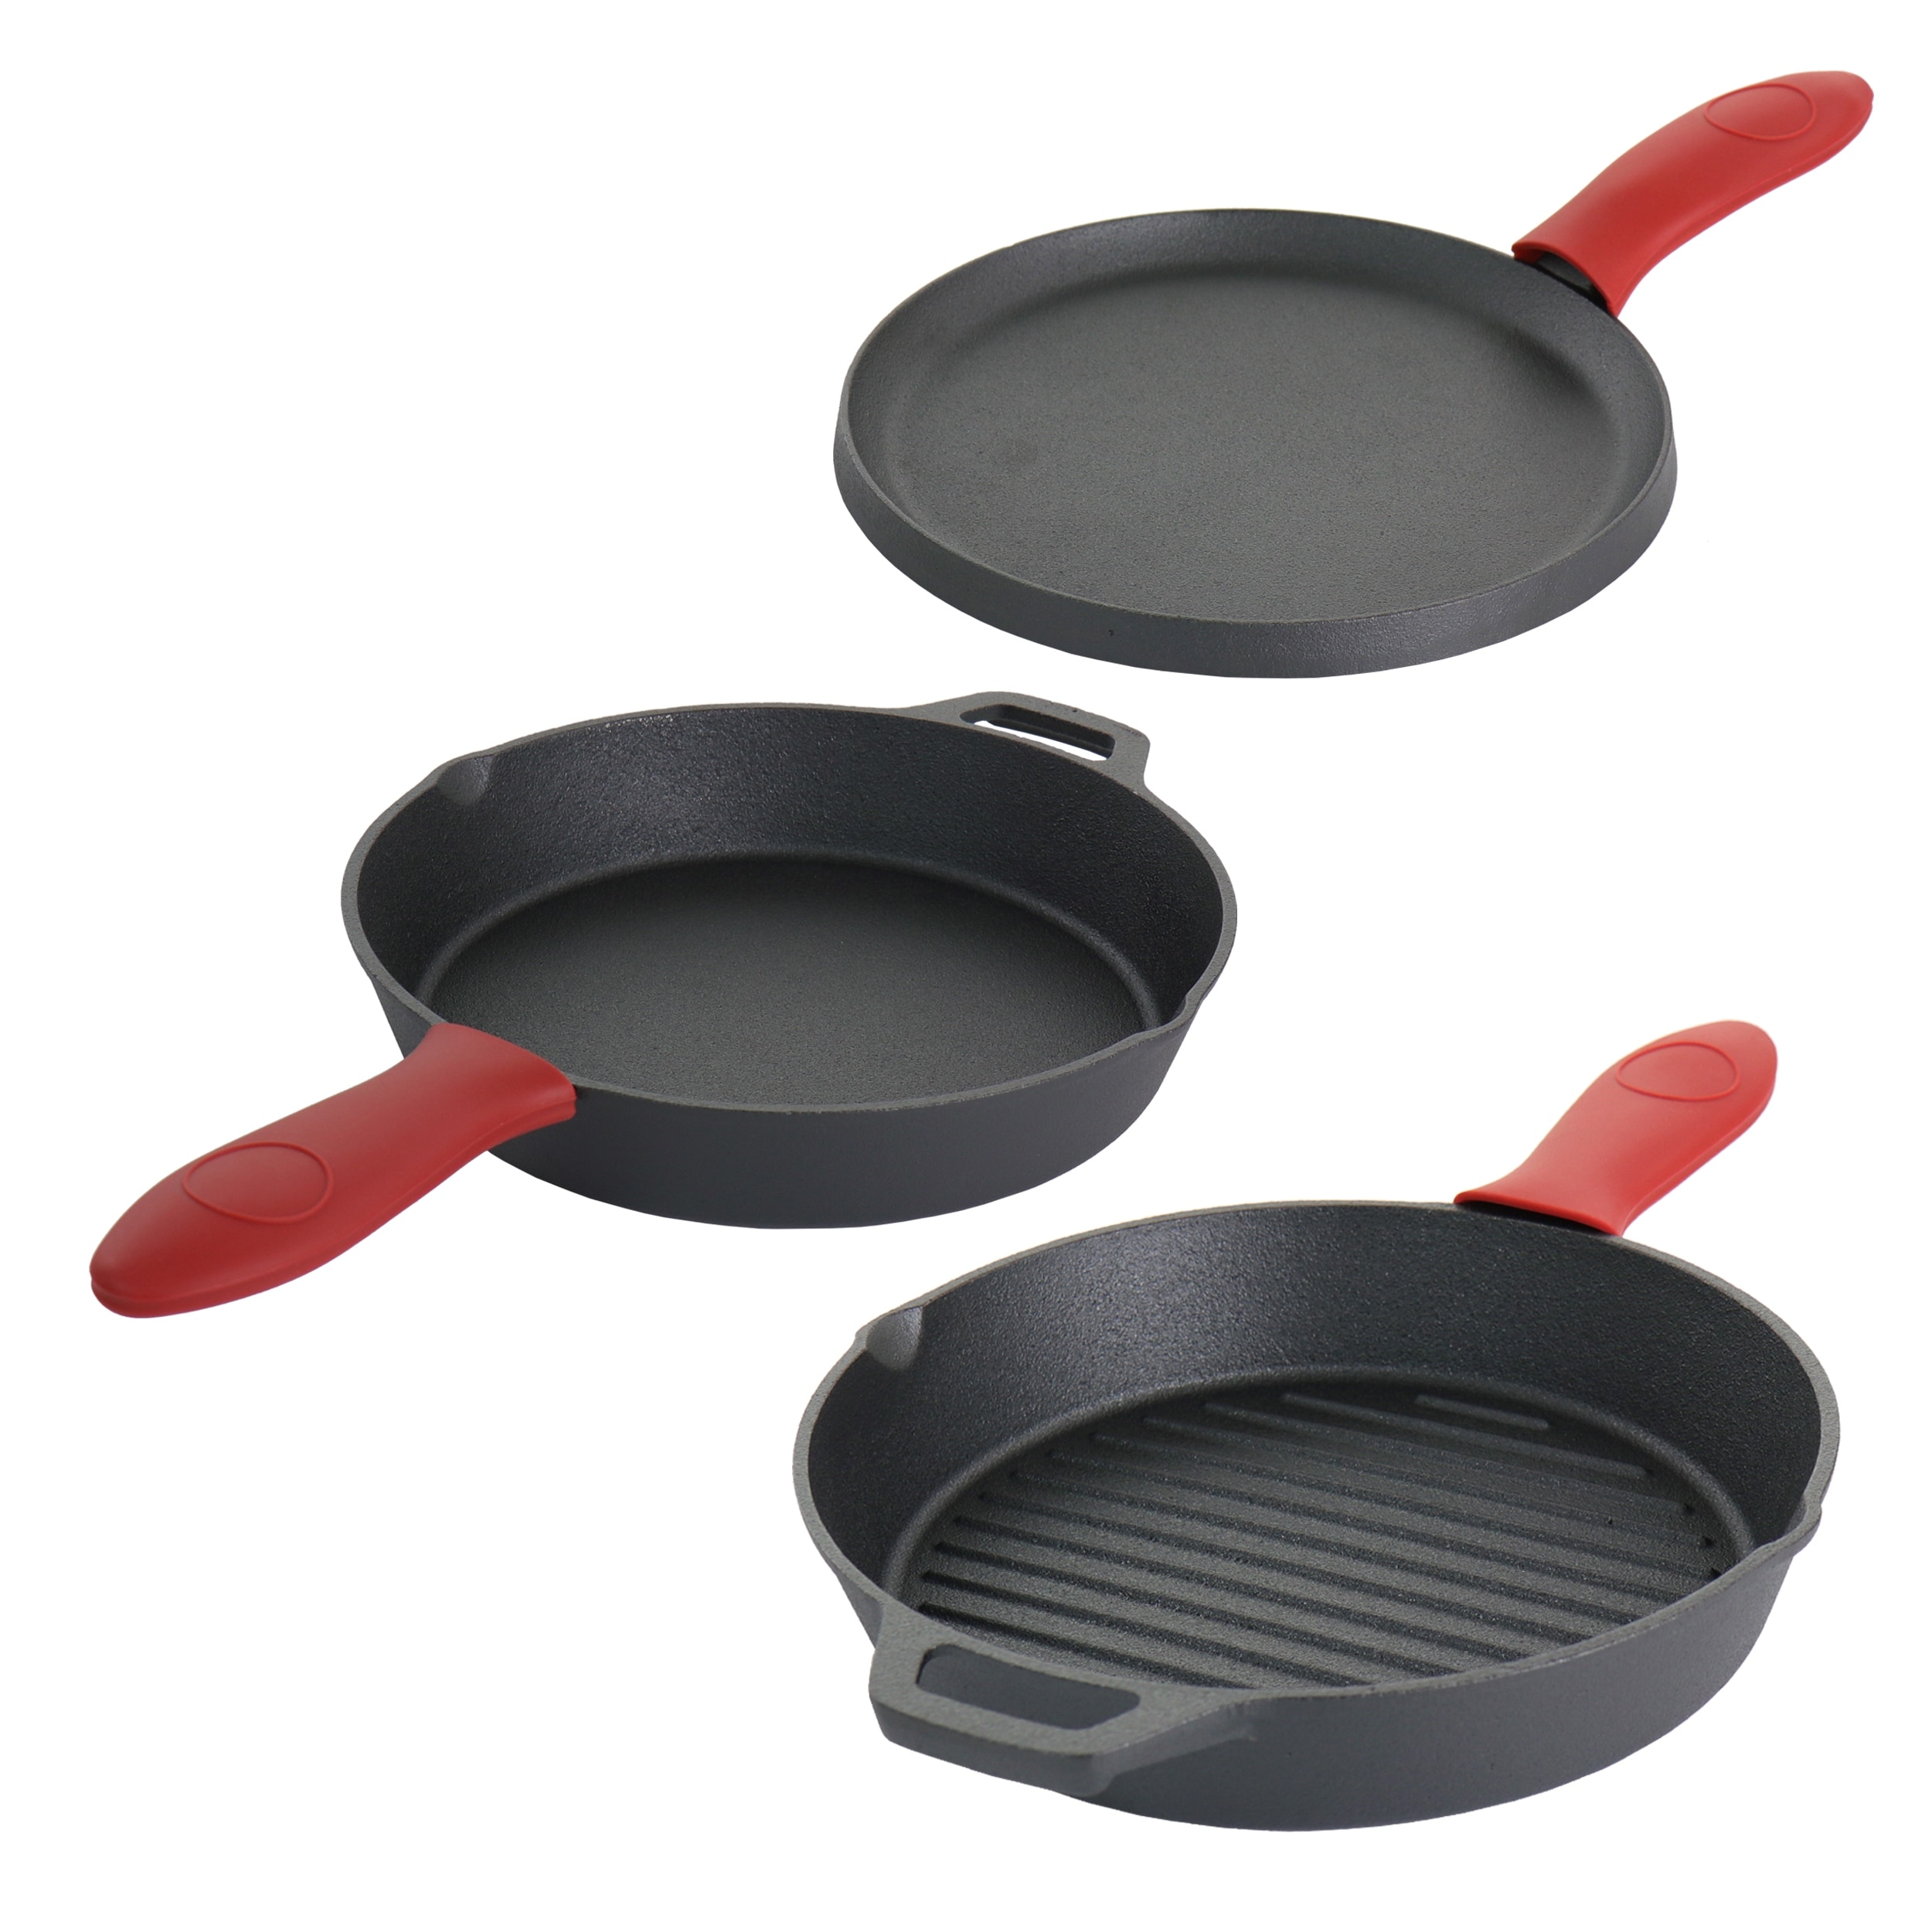 Lodge 12 Inch Cast Iron Skillet. Pre-Seasoned Cast Iron Skillet with Red  Silicone Hot Handle Holder. 